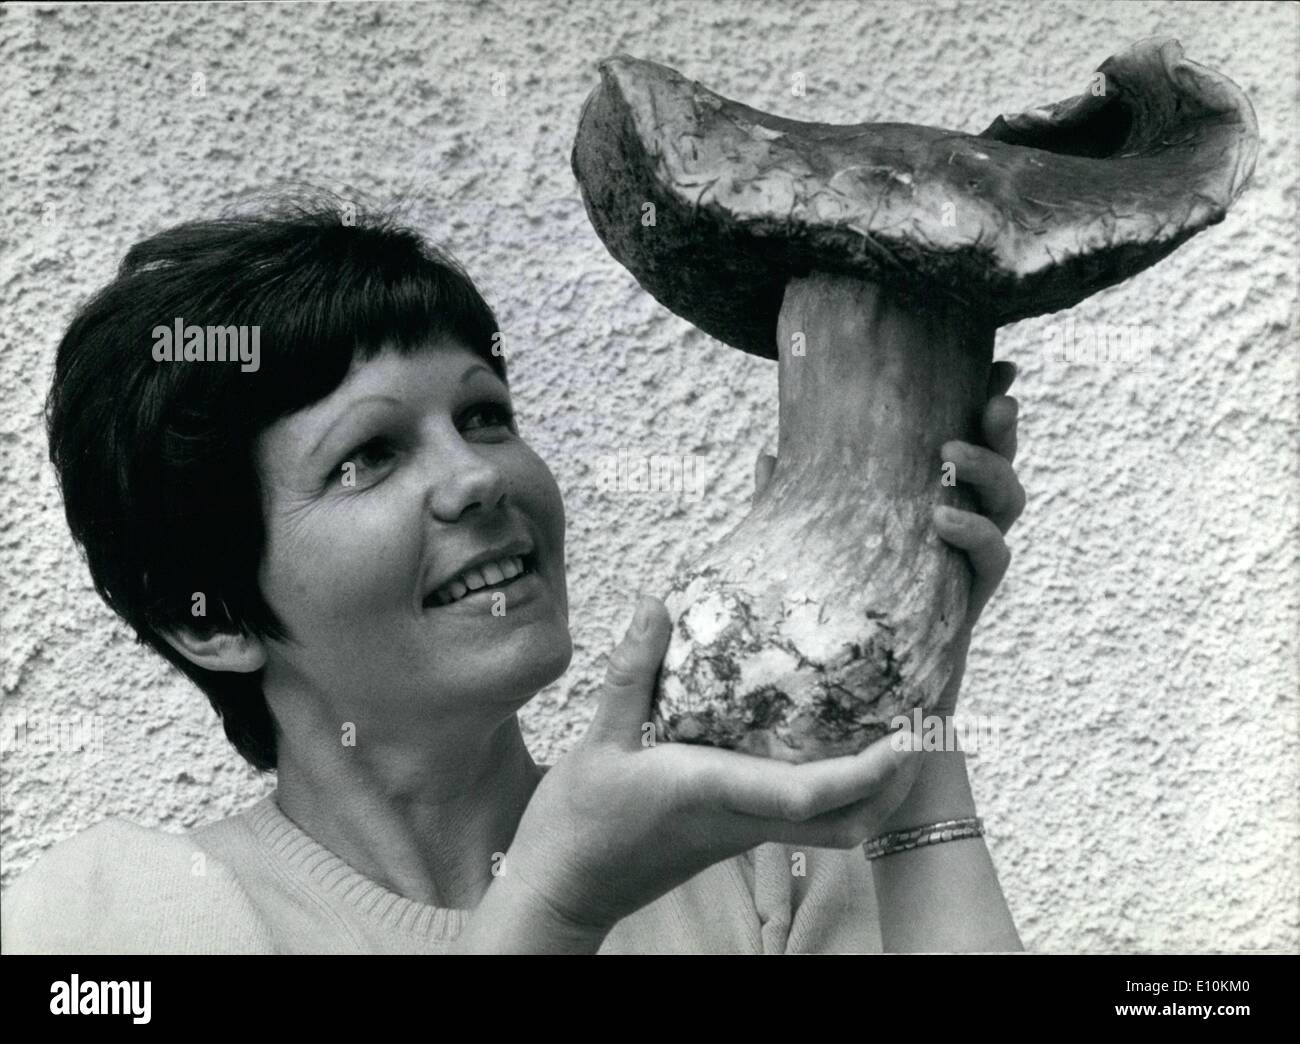 Jul. 07, 1973 - This enormous specimen of a mushroom; was found by Brigitte Friedl (our picture) in the woods near her home in Grasbrunn, situated in the vicinity of Munich. The mushroom is so big, that it'll do for a meal even for a large family, weighing 1760 grams. The stem's circumference is 31 centimeters, its height is 20 cm; the circumference of the cap is 29.5 cm. What a giant among mushrooms, certainly specimens of this size are only seldom found. Stock Photo